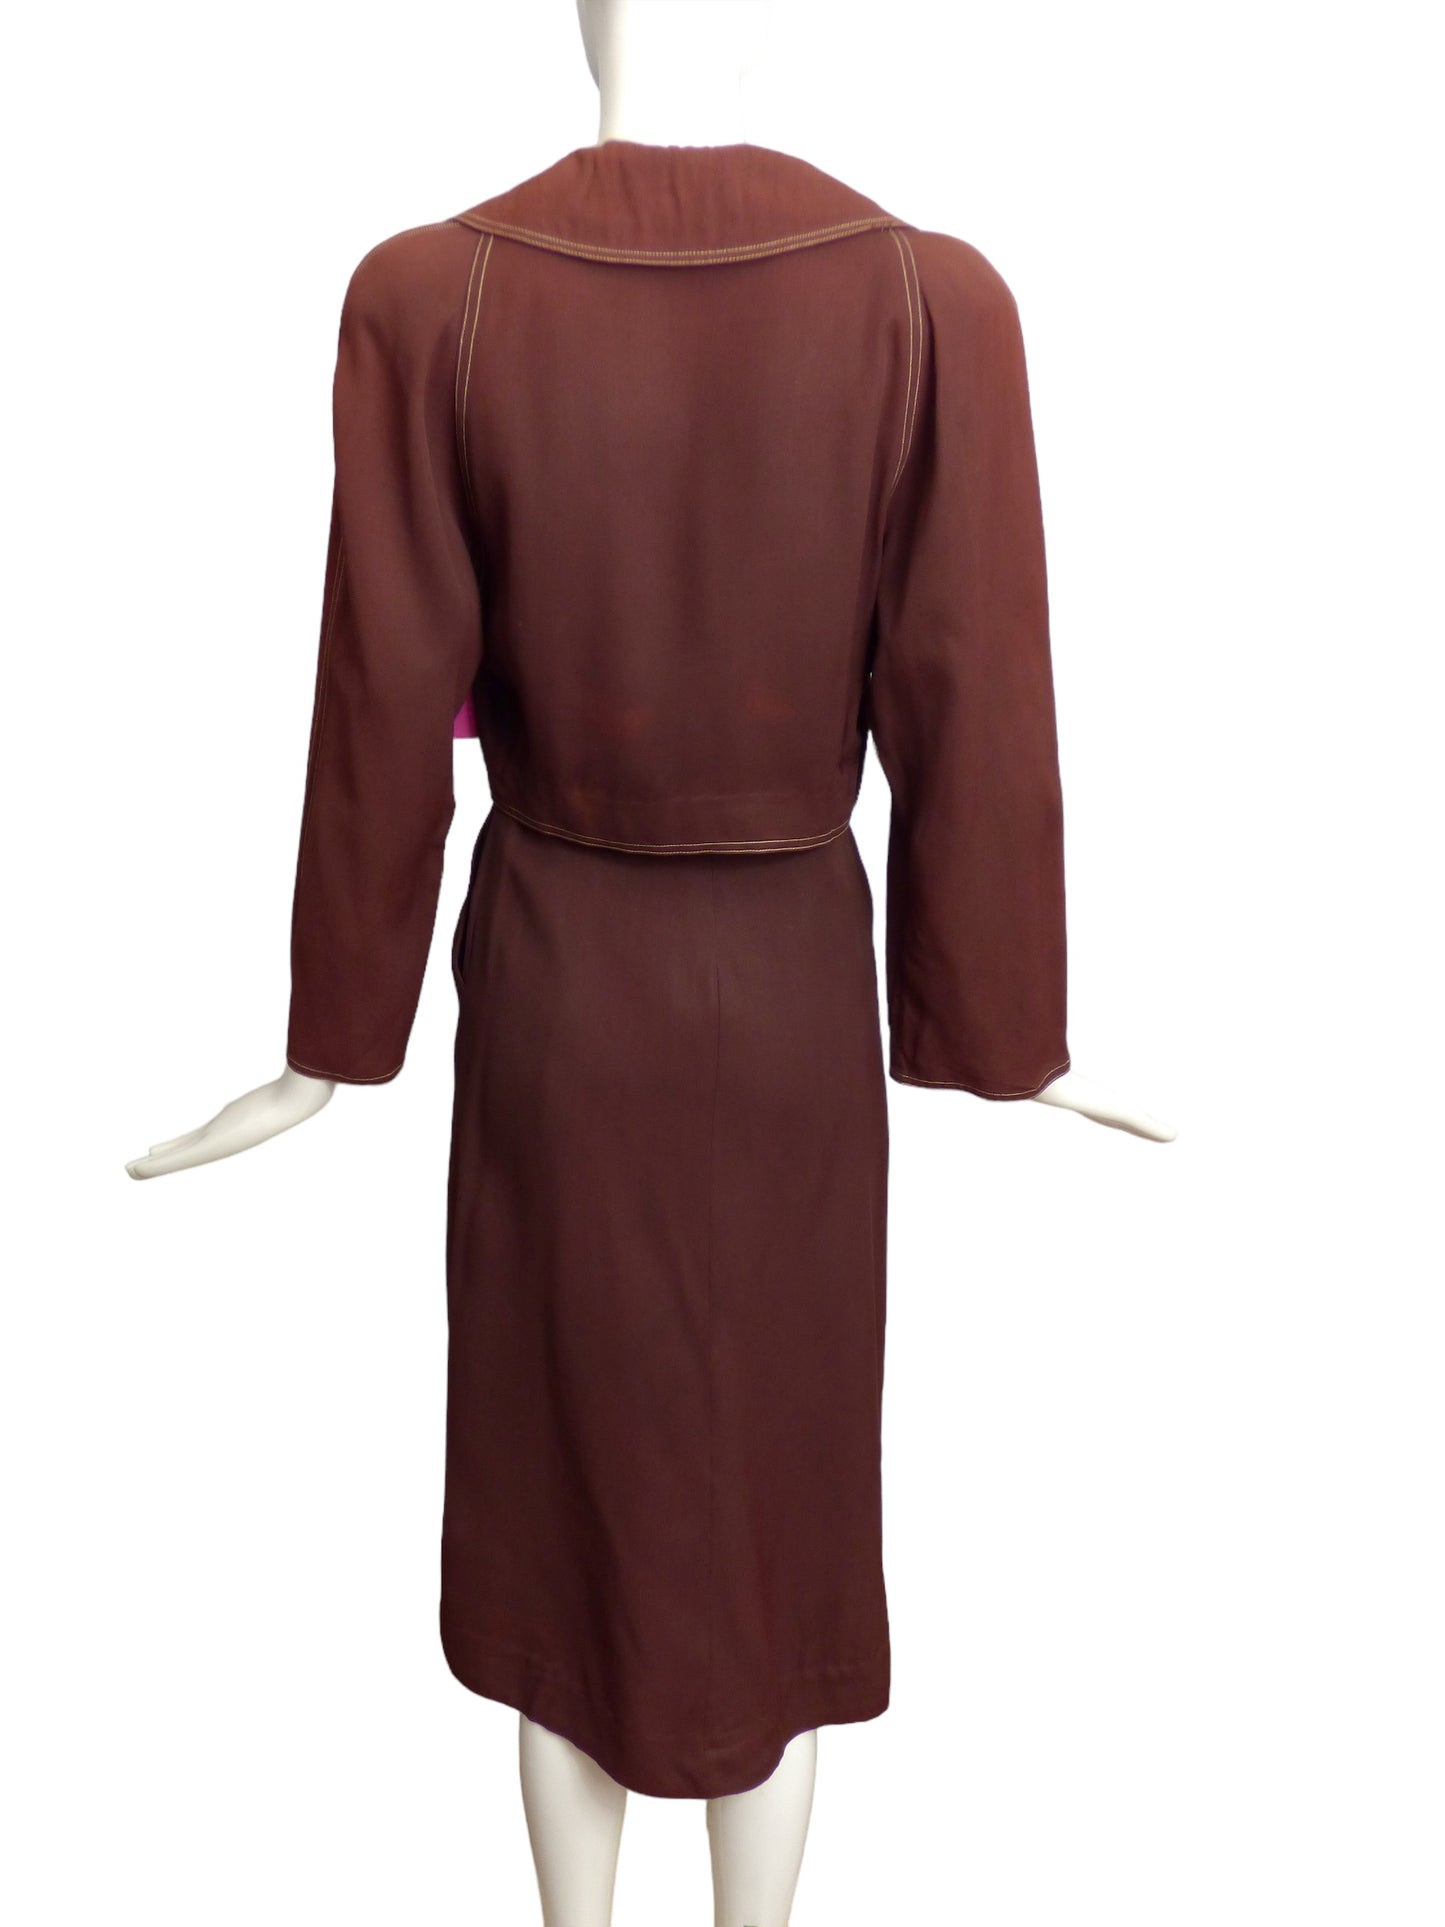 CLAIRE MCCARDELL- AS IS 1940s 3pc Brown Gaberdine Playsuit, Size 6